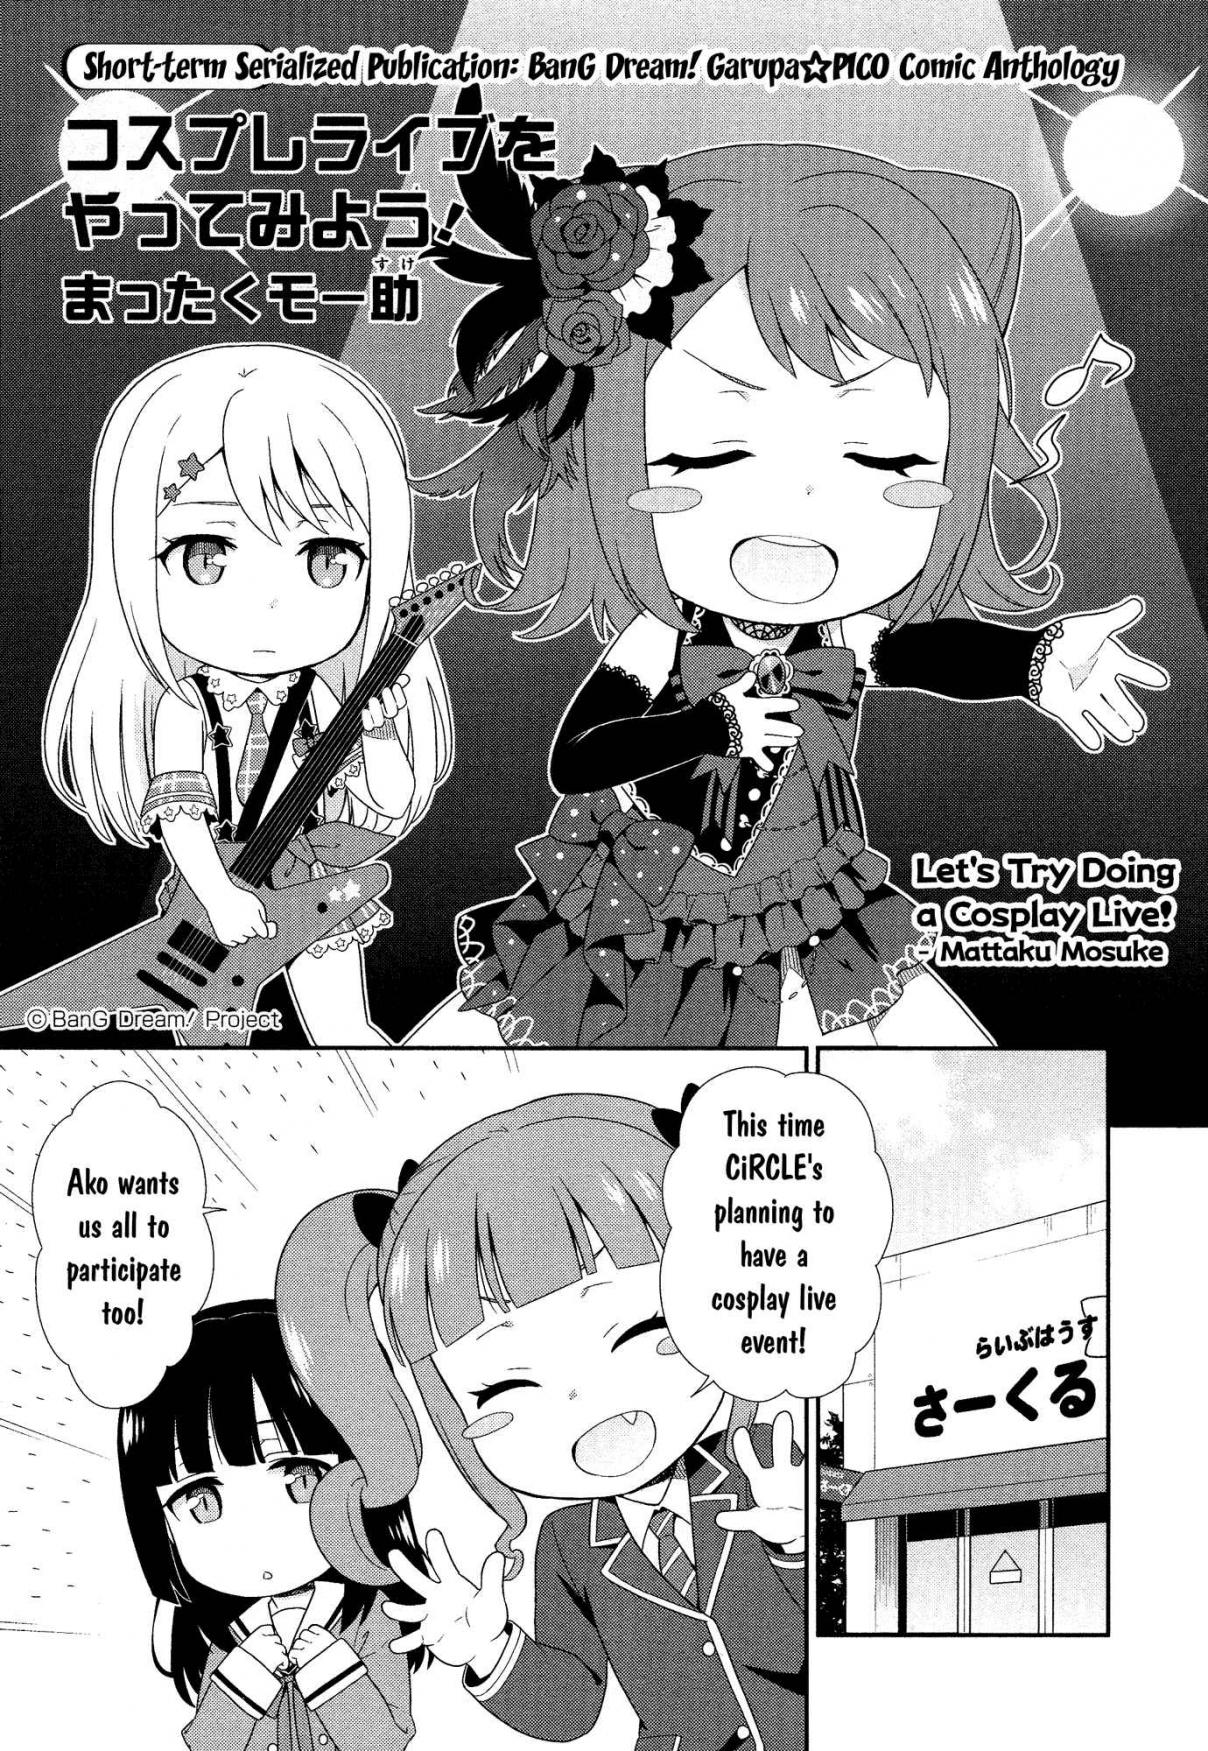 BanG Dream! Garupa☆PICO Comic Anthology Ch. 4 Let's Try Doing a Cosplay Live!